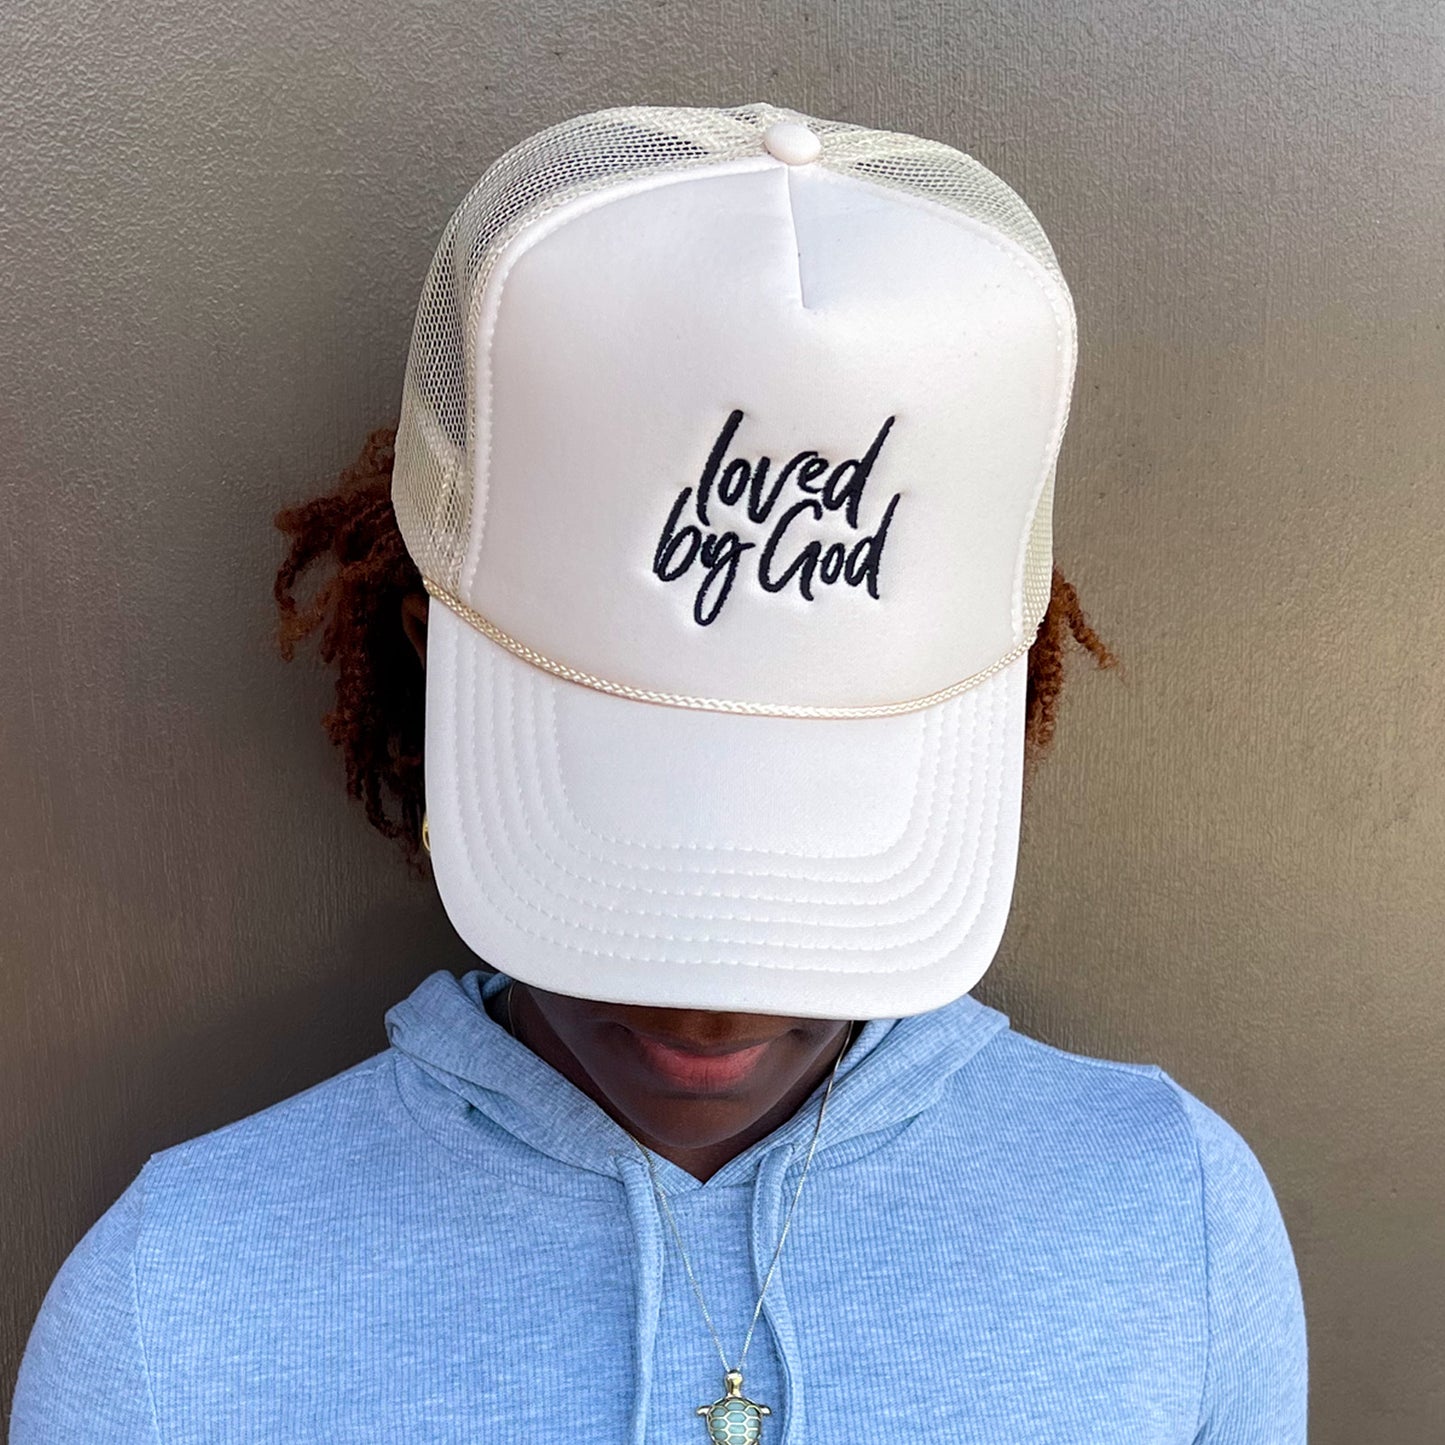 Loved by God Scripted Trucker Hats